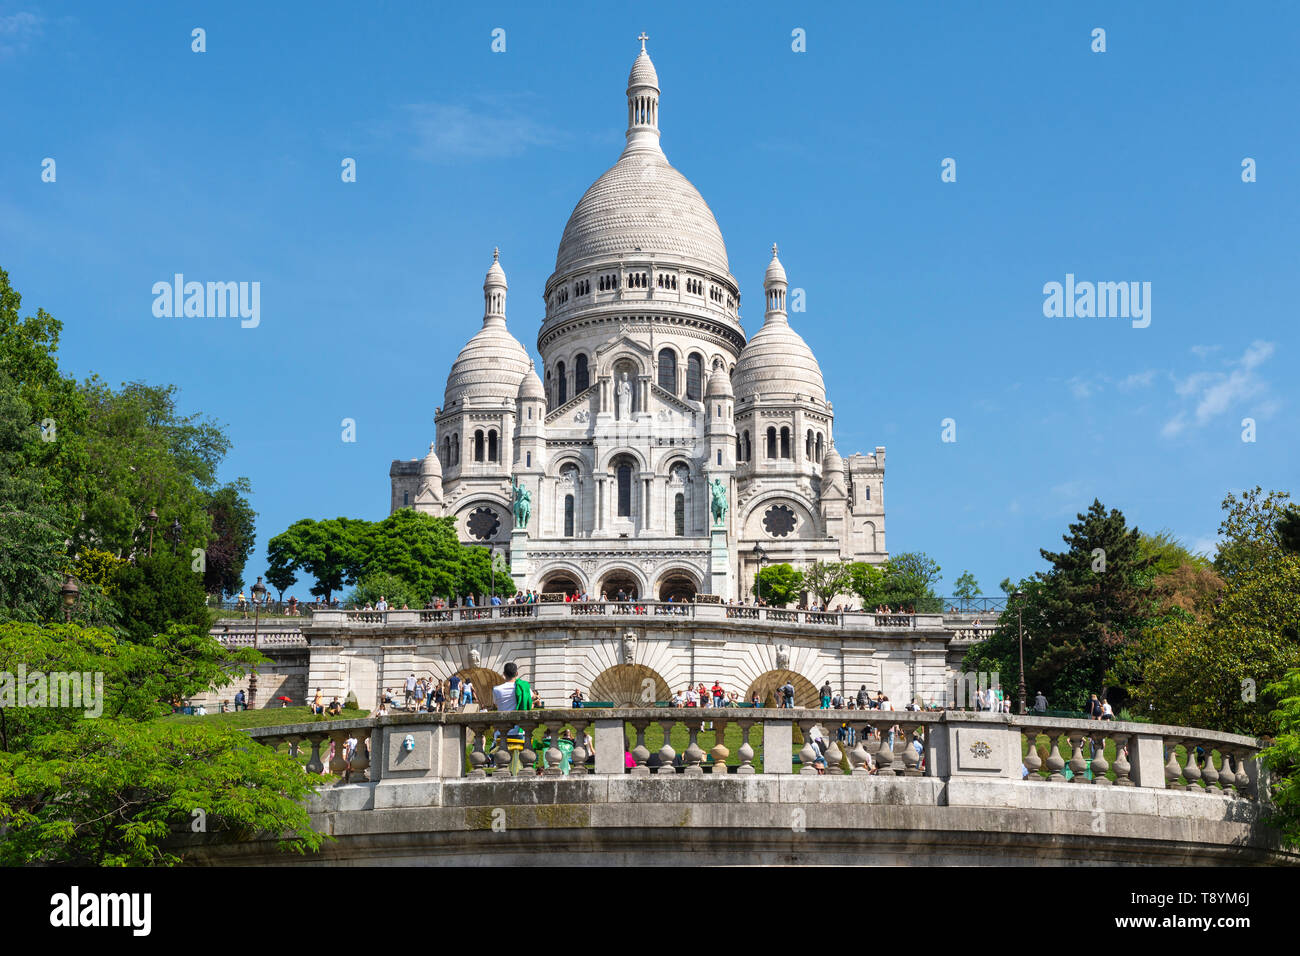 View of Sacre-Coeur Basilica from entrance to Square Louise-Michel in Montmartre, Paris, France Stock Photo